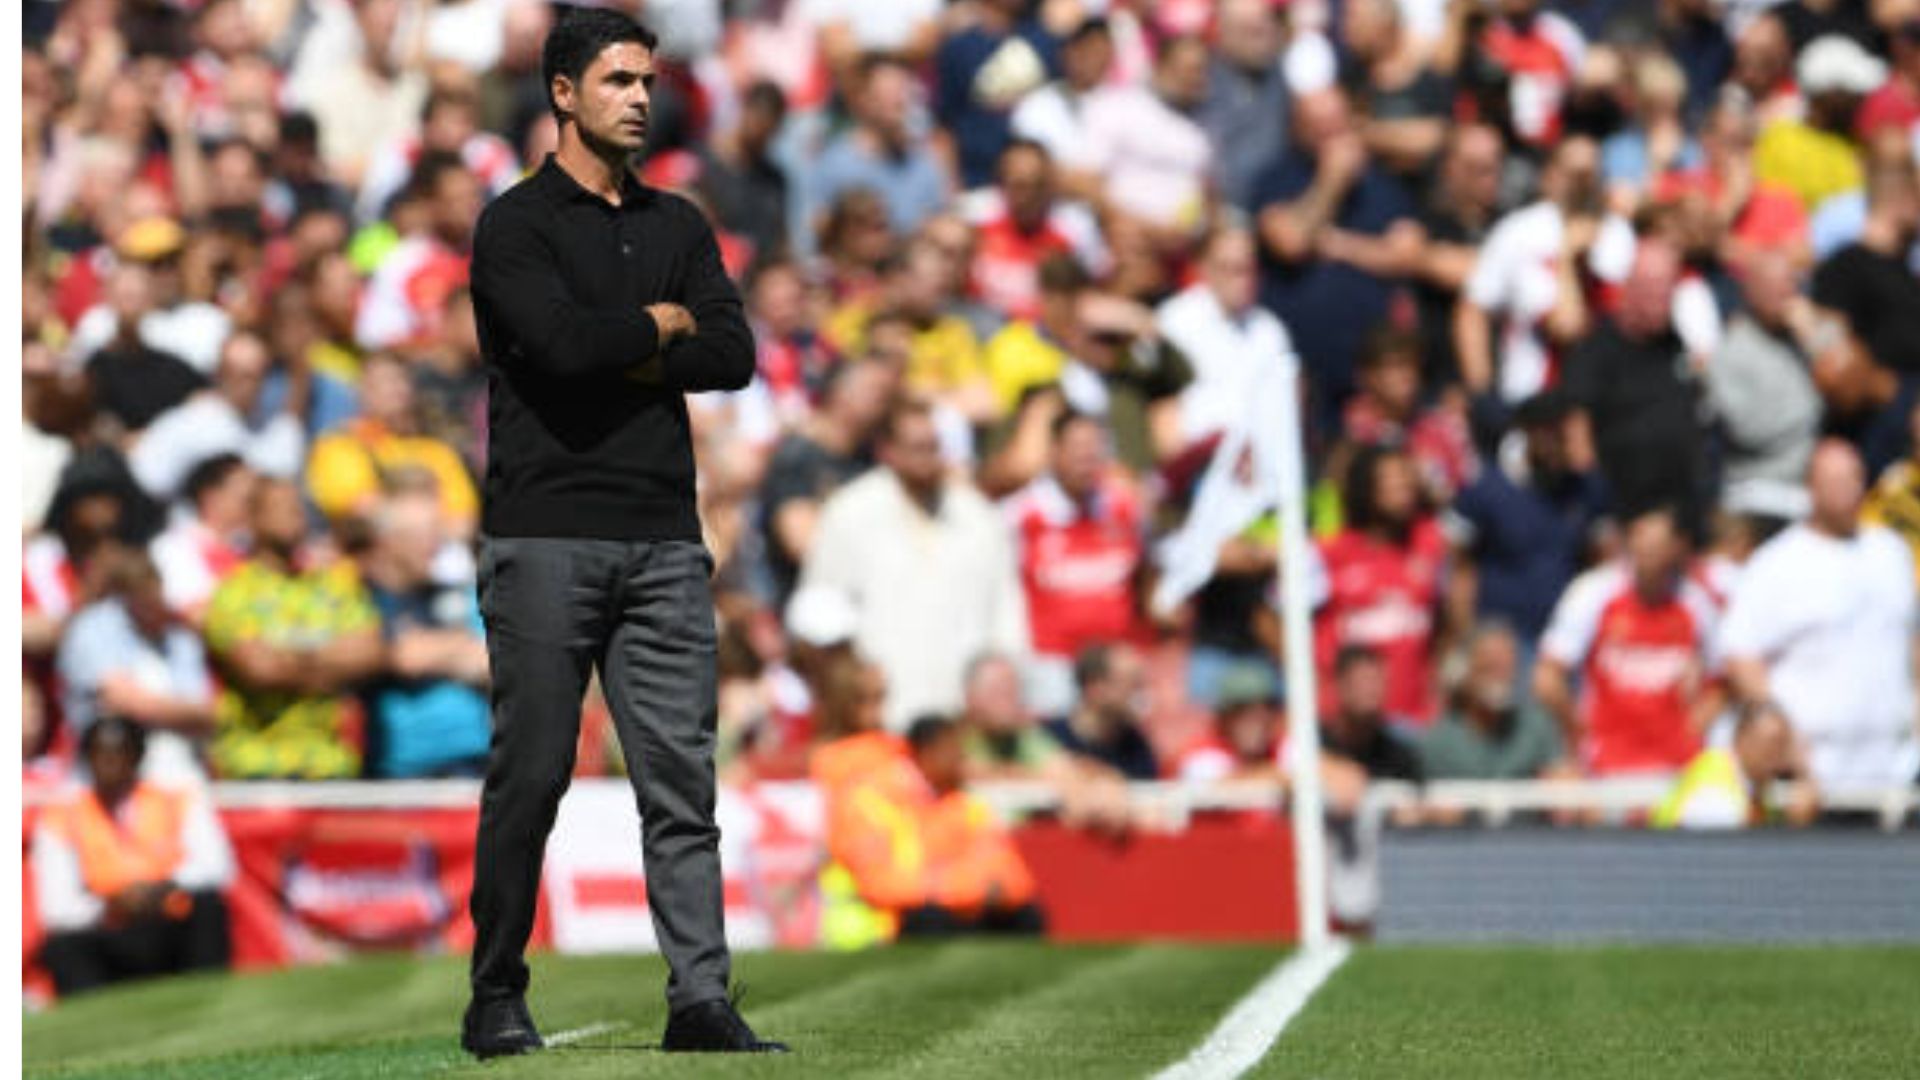 ‘MIKEL ARTETA REALLY RANKS HIM’: JOURNALIST SAYS AGENTS TOLD HIM ARSENAL STAR WAS ALMOST JOINING CHELSEA